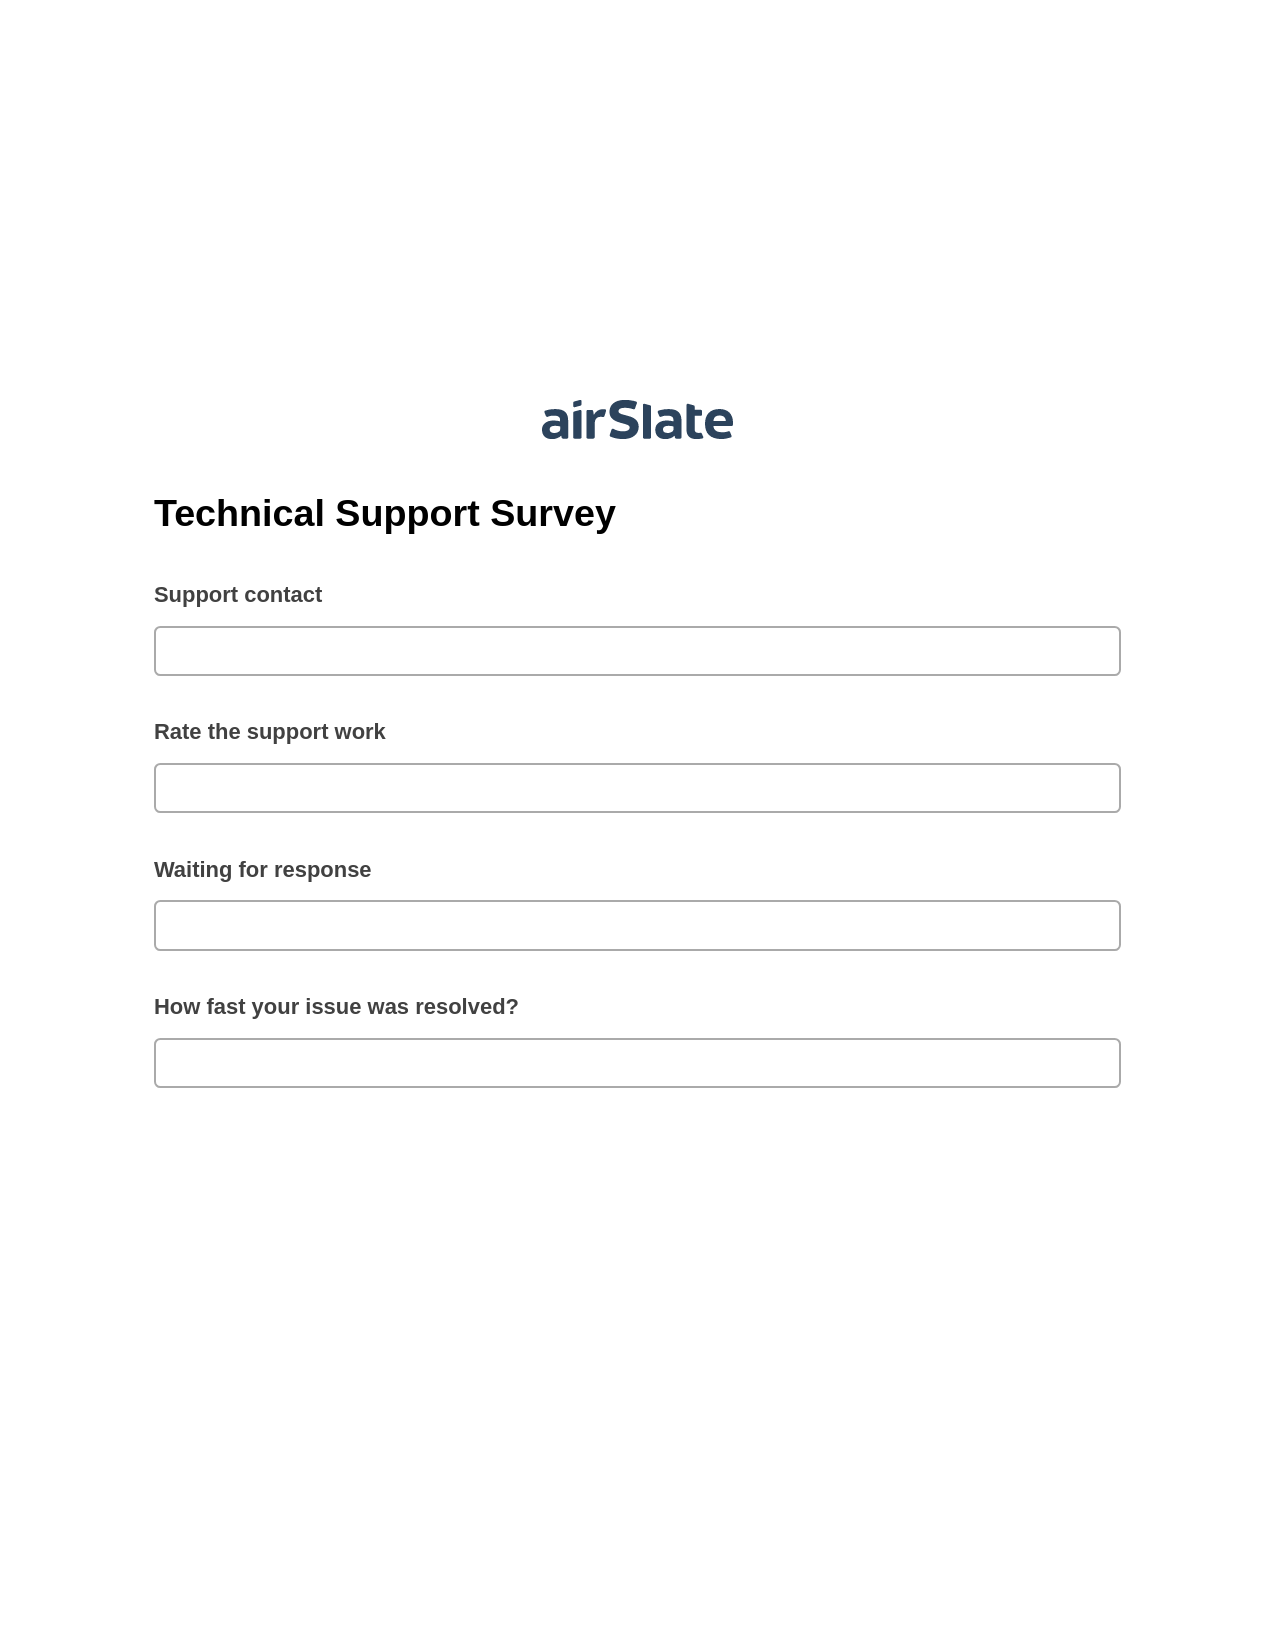 Multirole Technical Support Survey Pre-fill Document Bot, Create Salesforce Records Bot, Archive to SharePoint Folder Bot